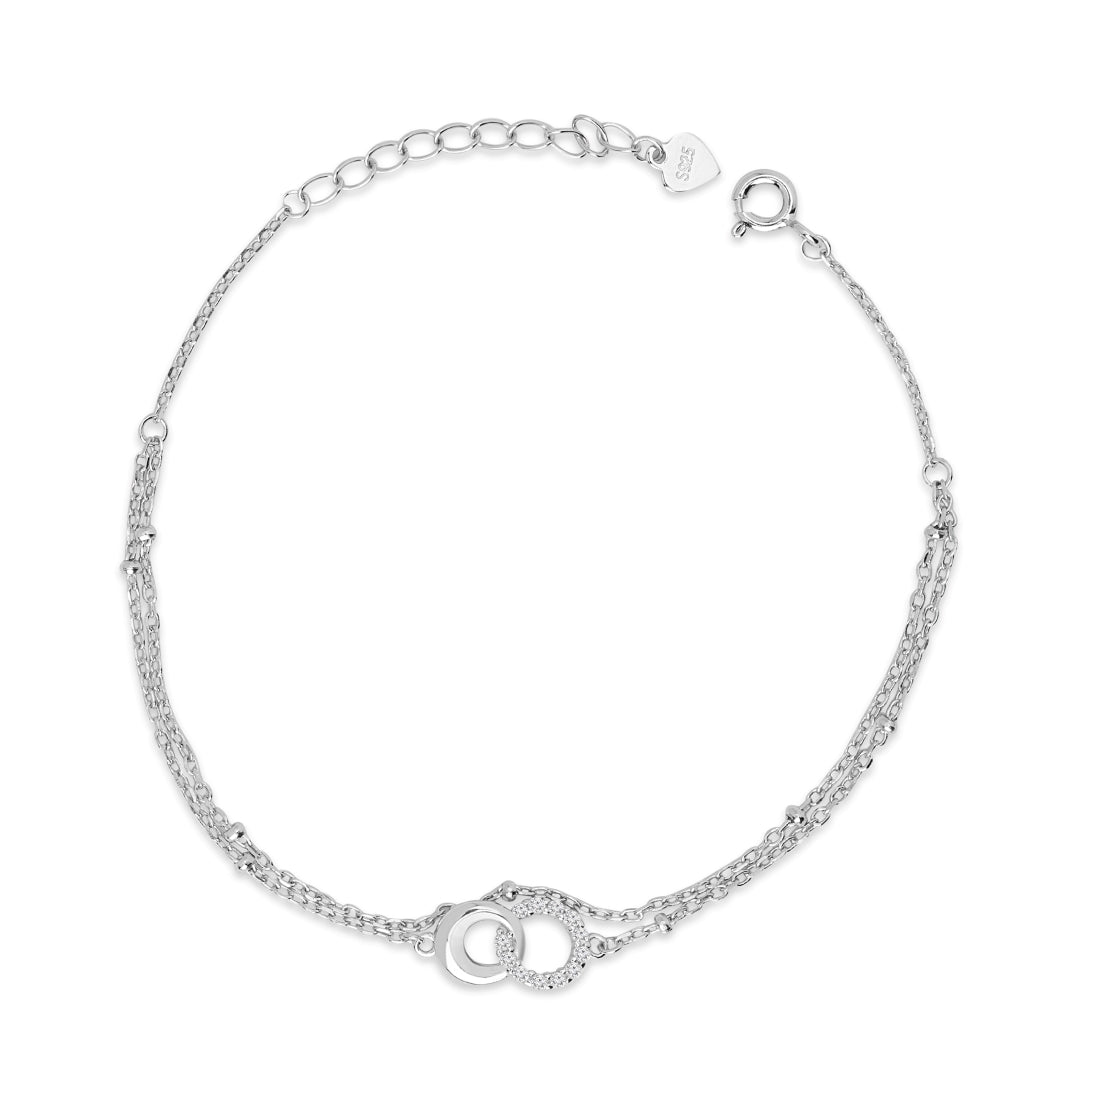 Dual Circle Radiance Rhodium Plated 925 Sterling Silver Bracelet